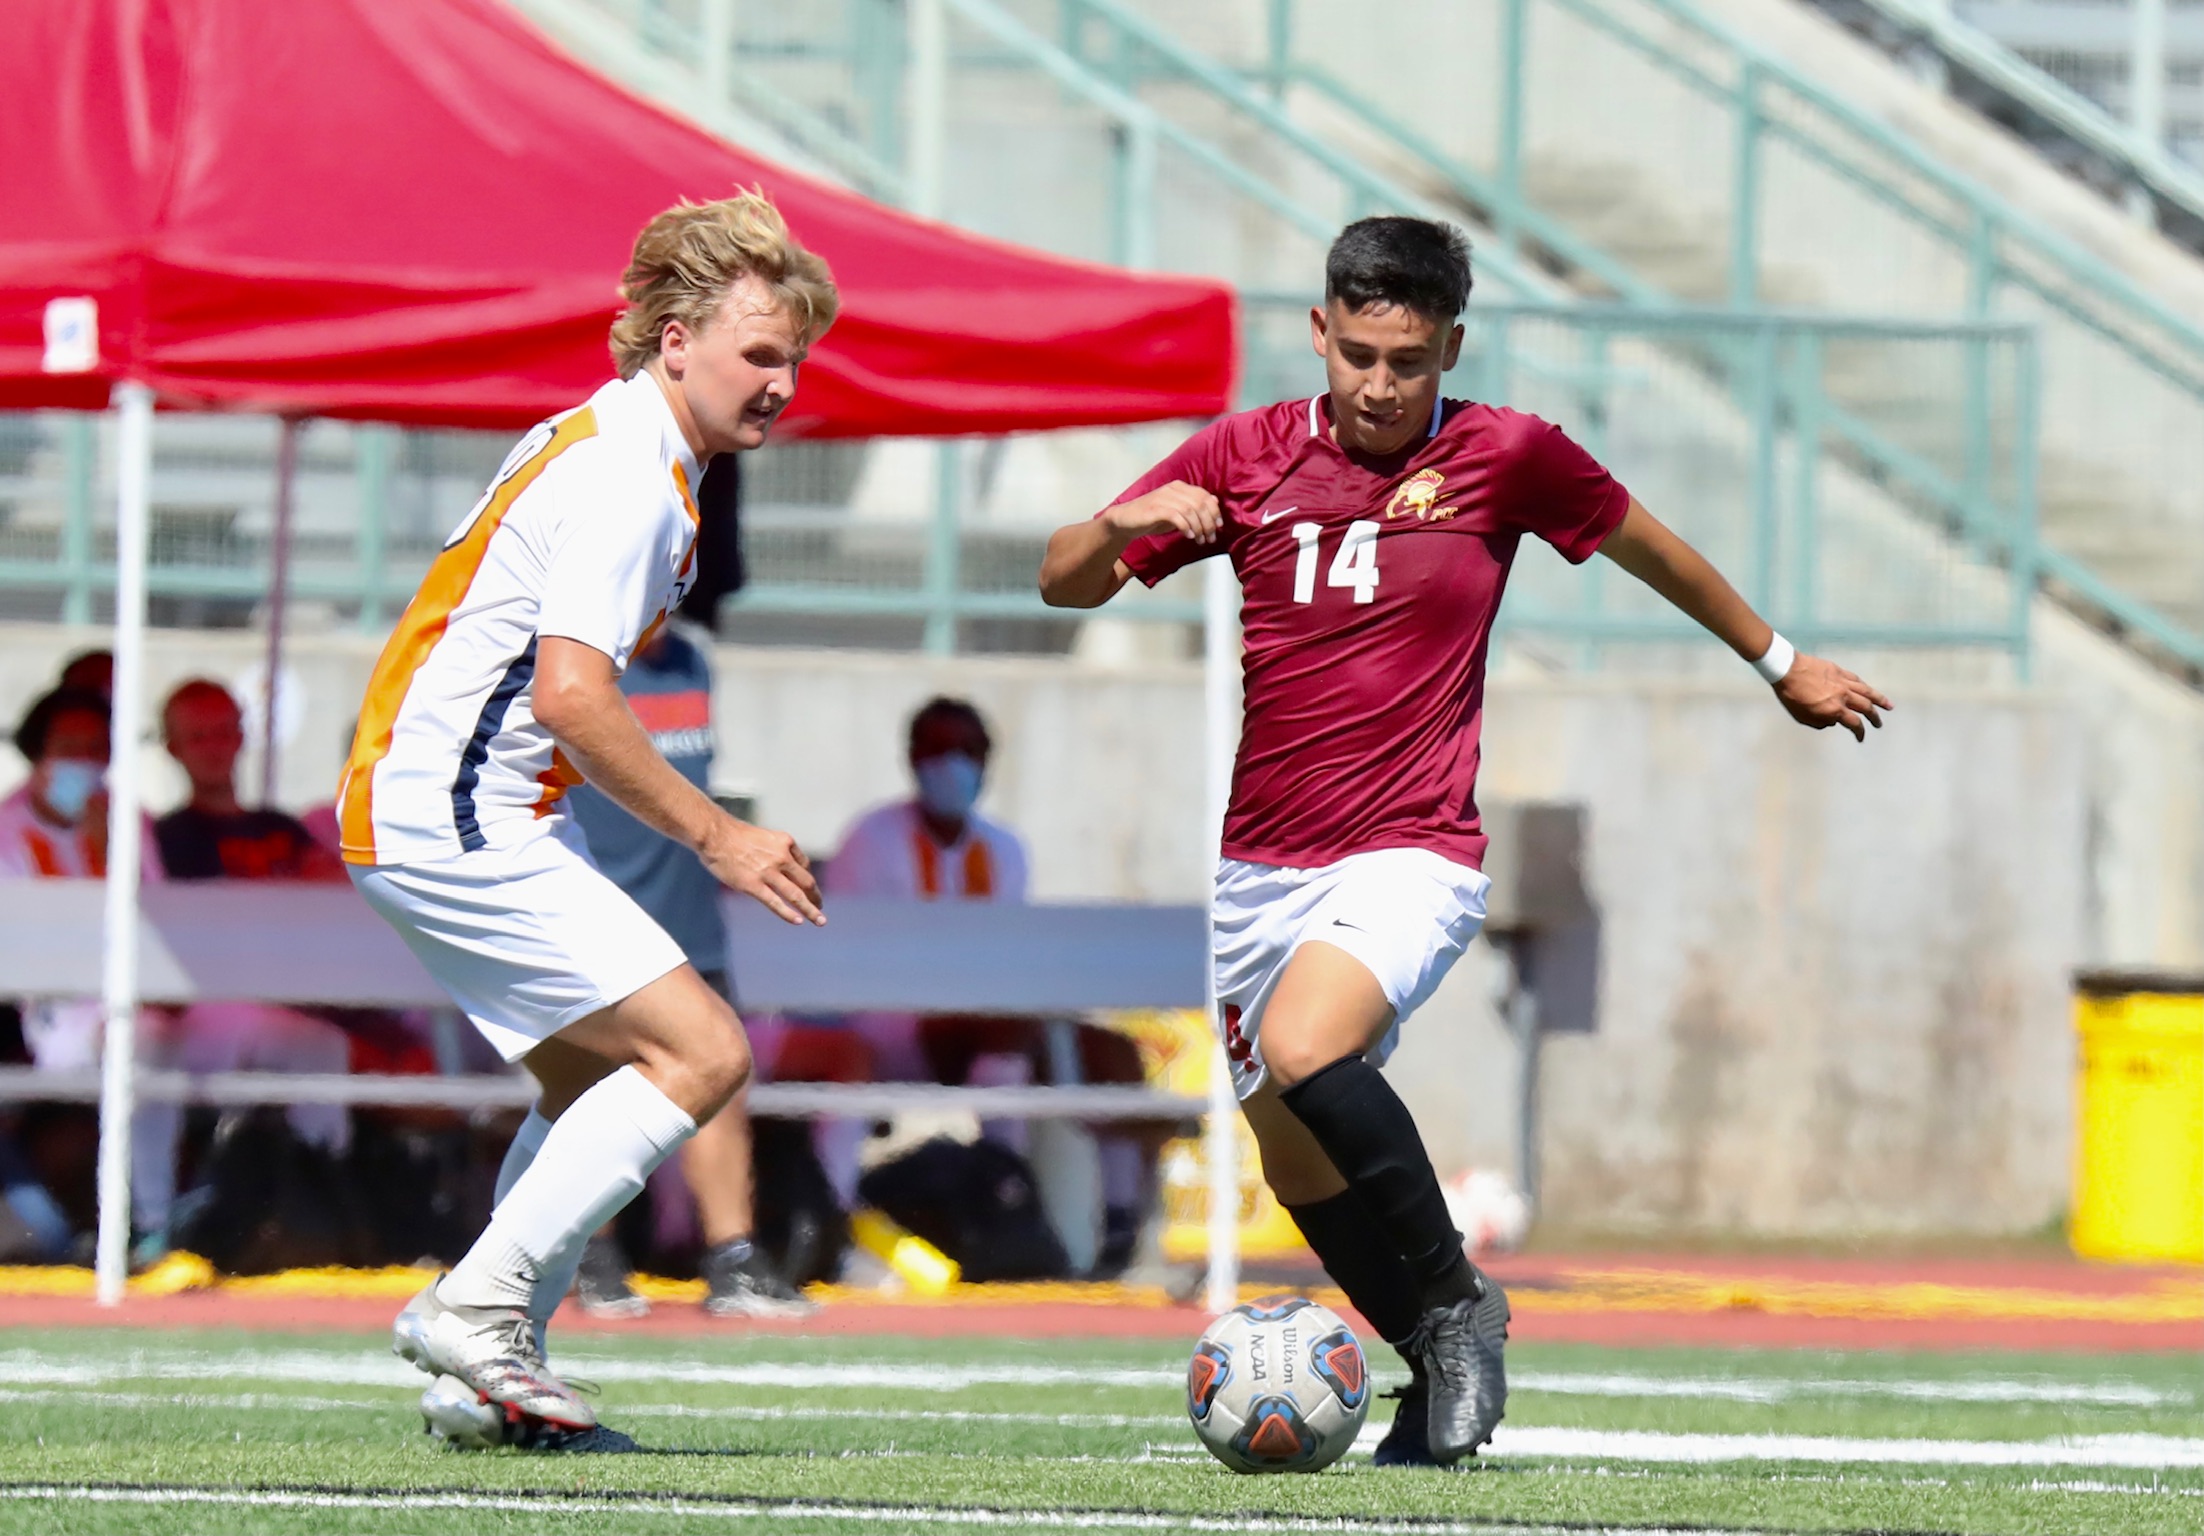 Nathan Cruz scored two goals in PCC's win on Friday at Robinson Stadium (photo by Michael Watkins).